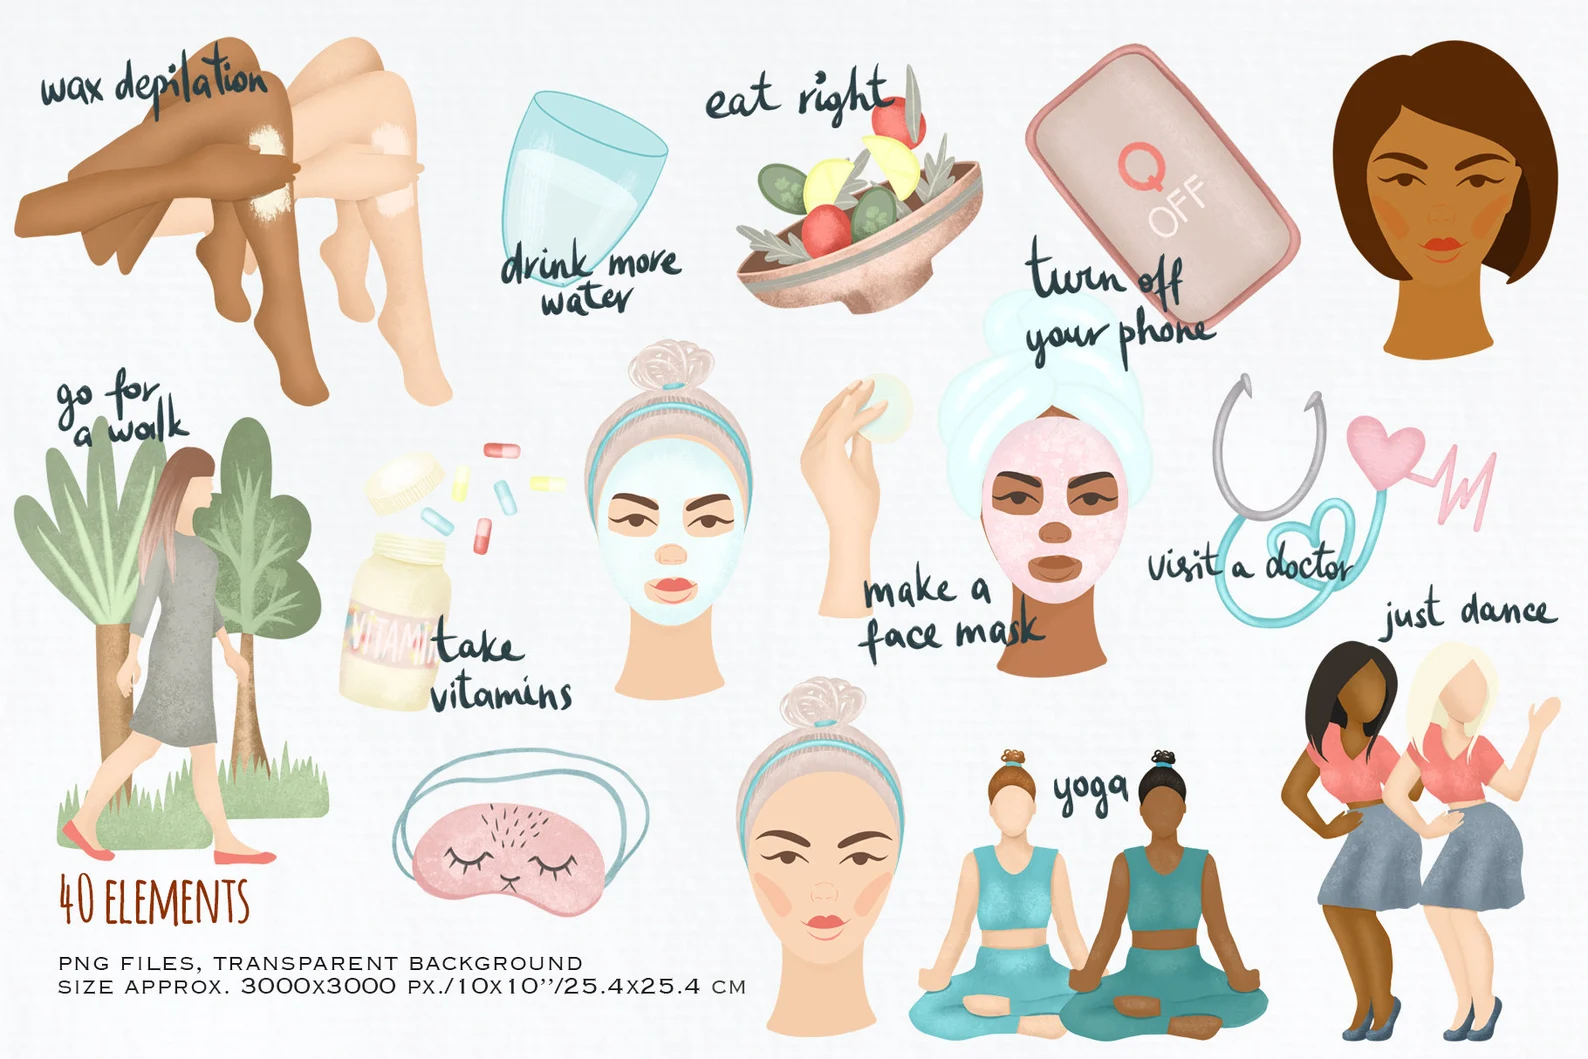 Perfect beauty illustrations for women.